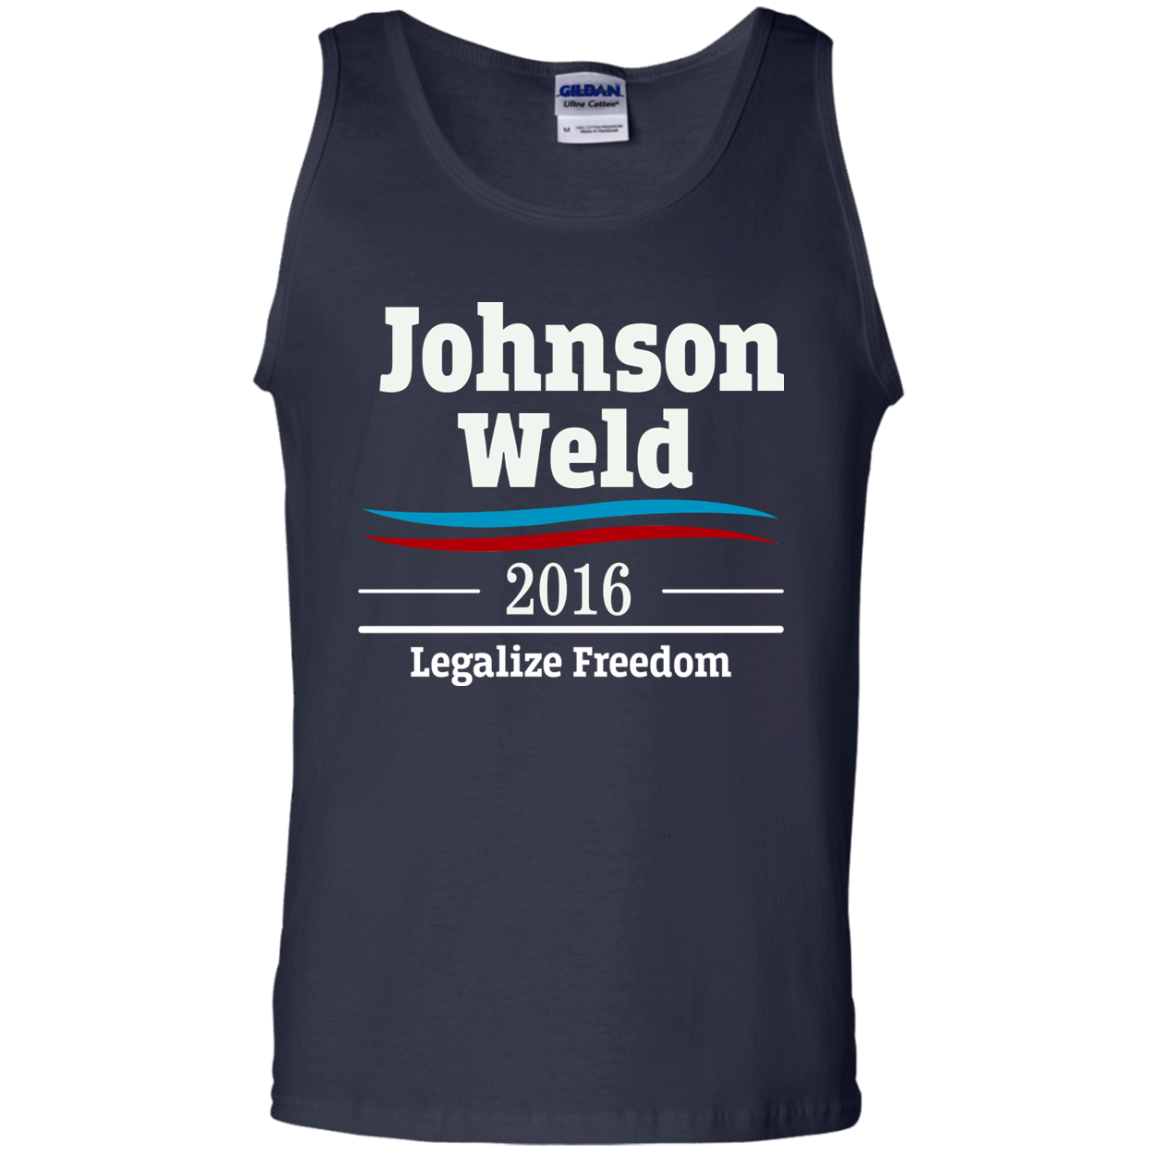 Legalize Freedom - Johnson Weld 2016 Shirts/Hoodies/Tanks - ifrogtees